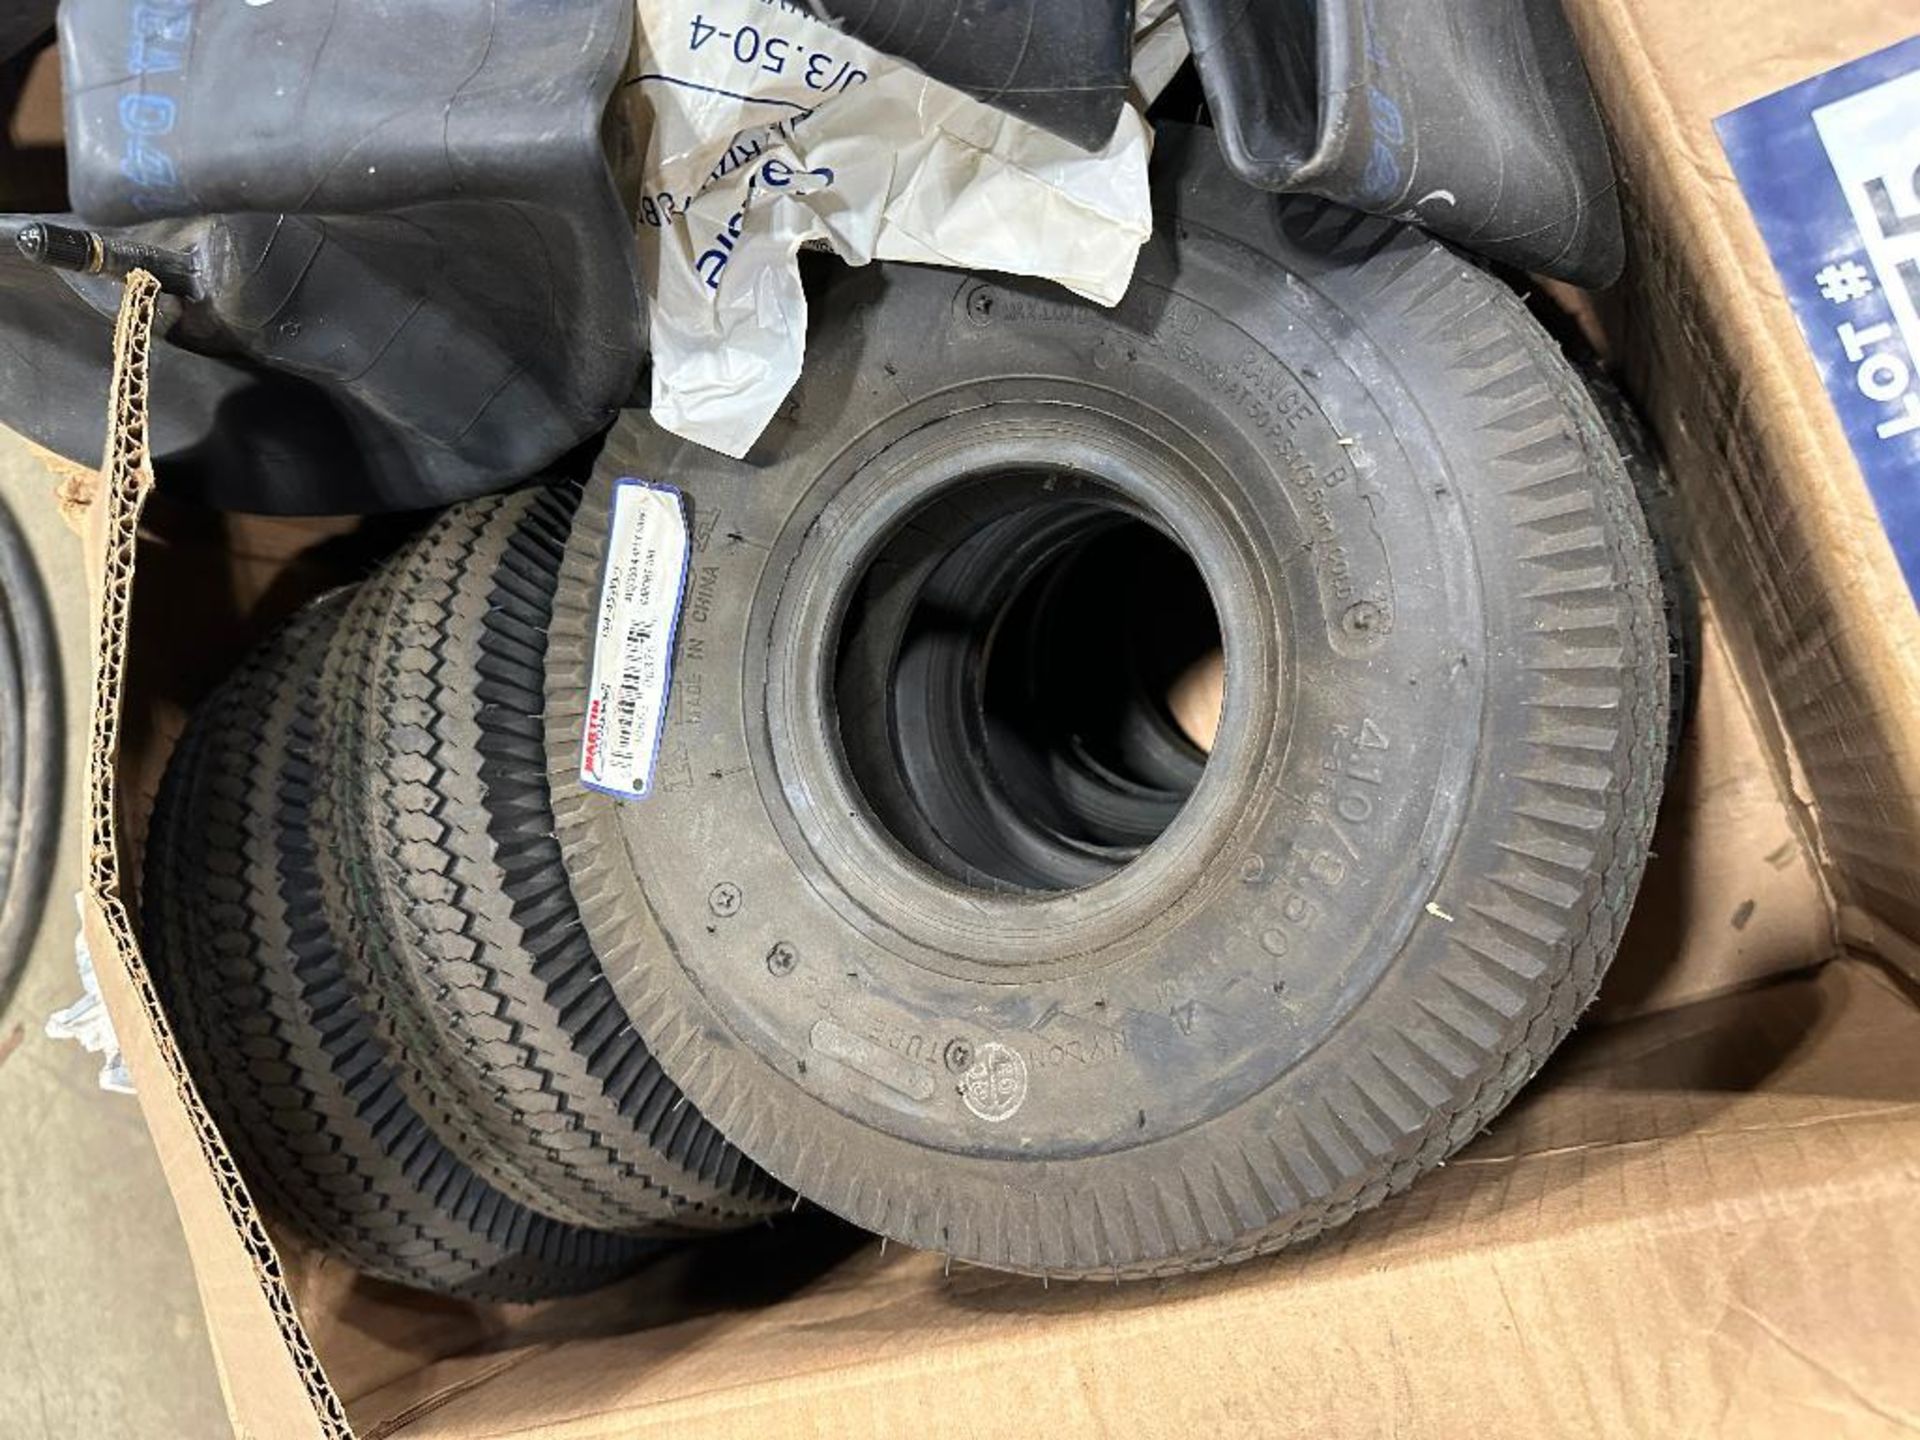 Lot of Asst. Rubber Tires, etc. - Image 3 of 5